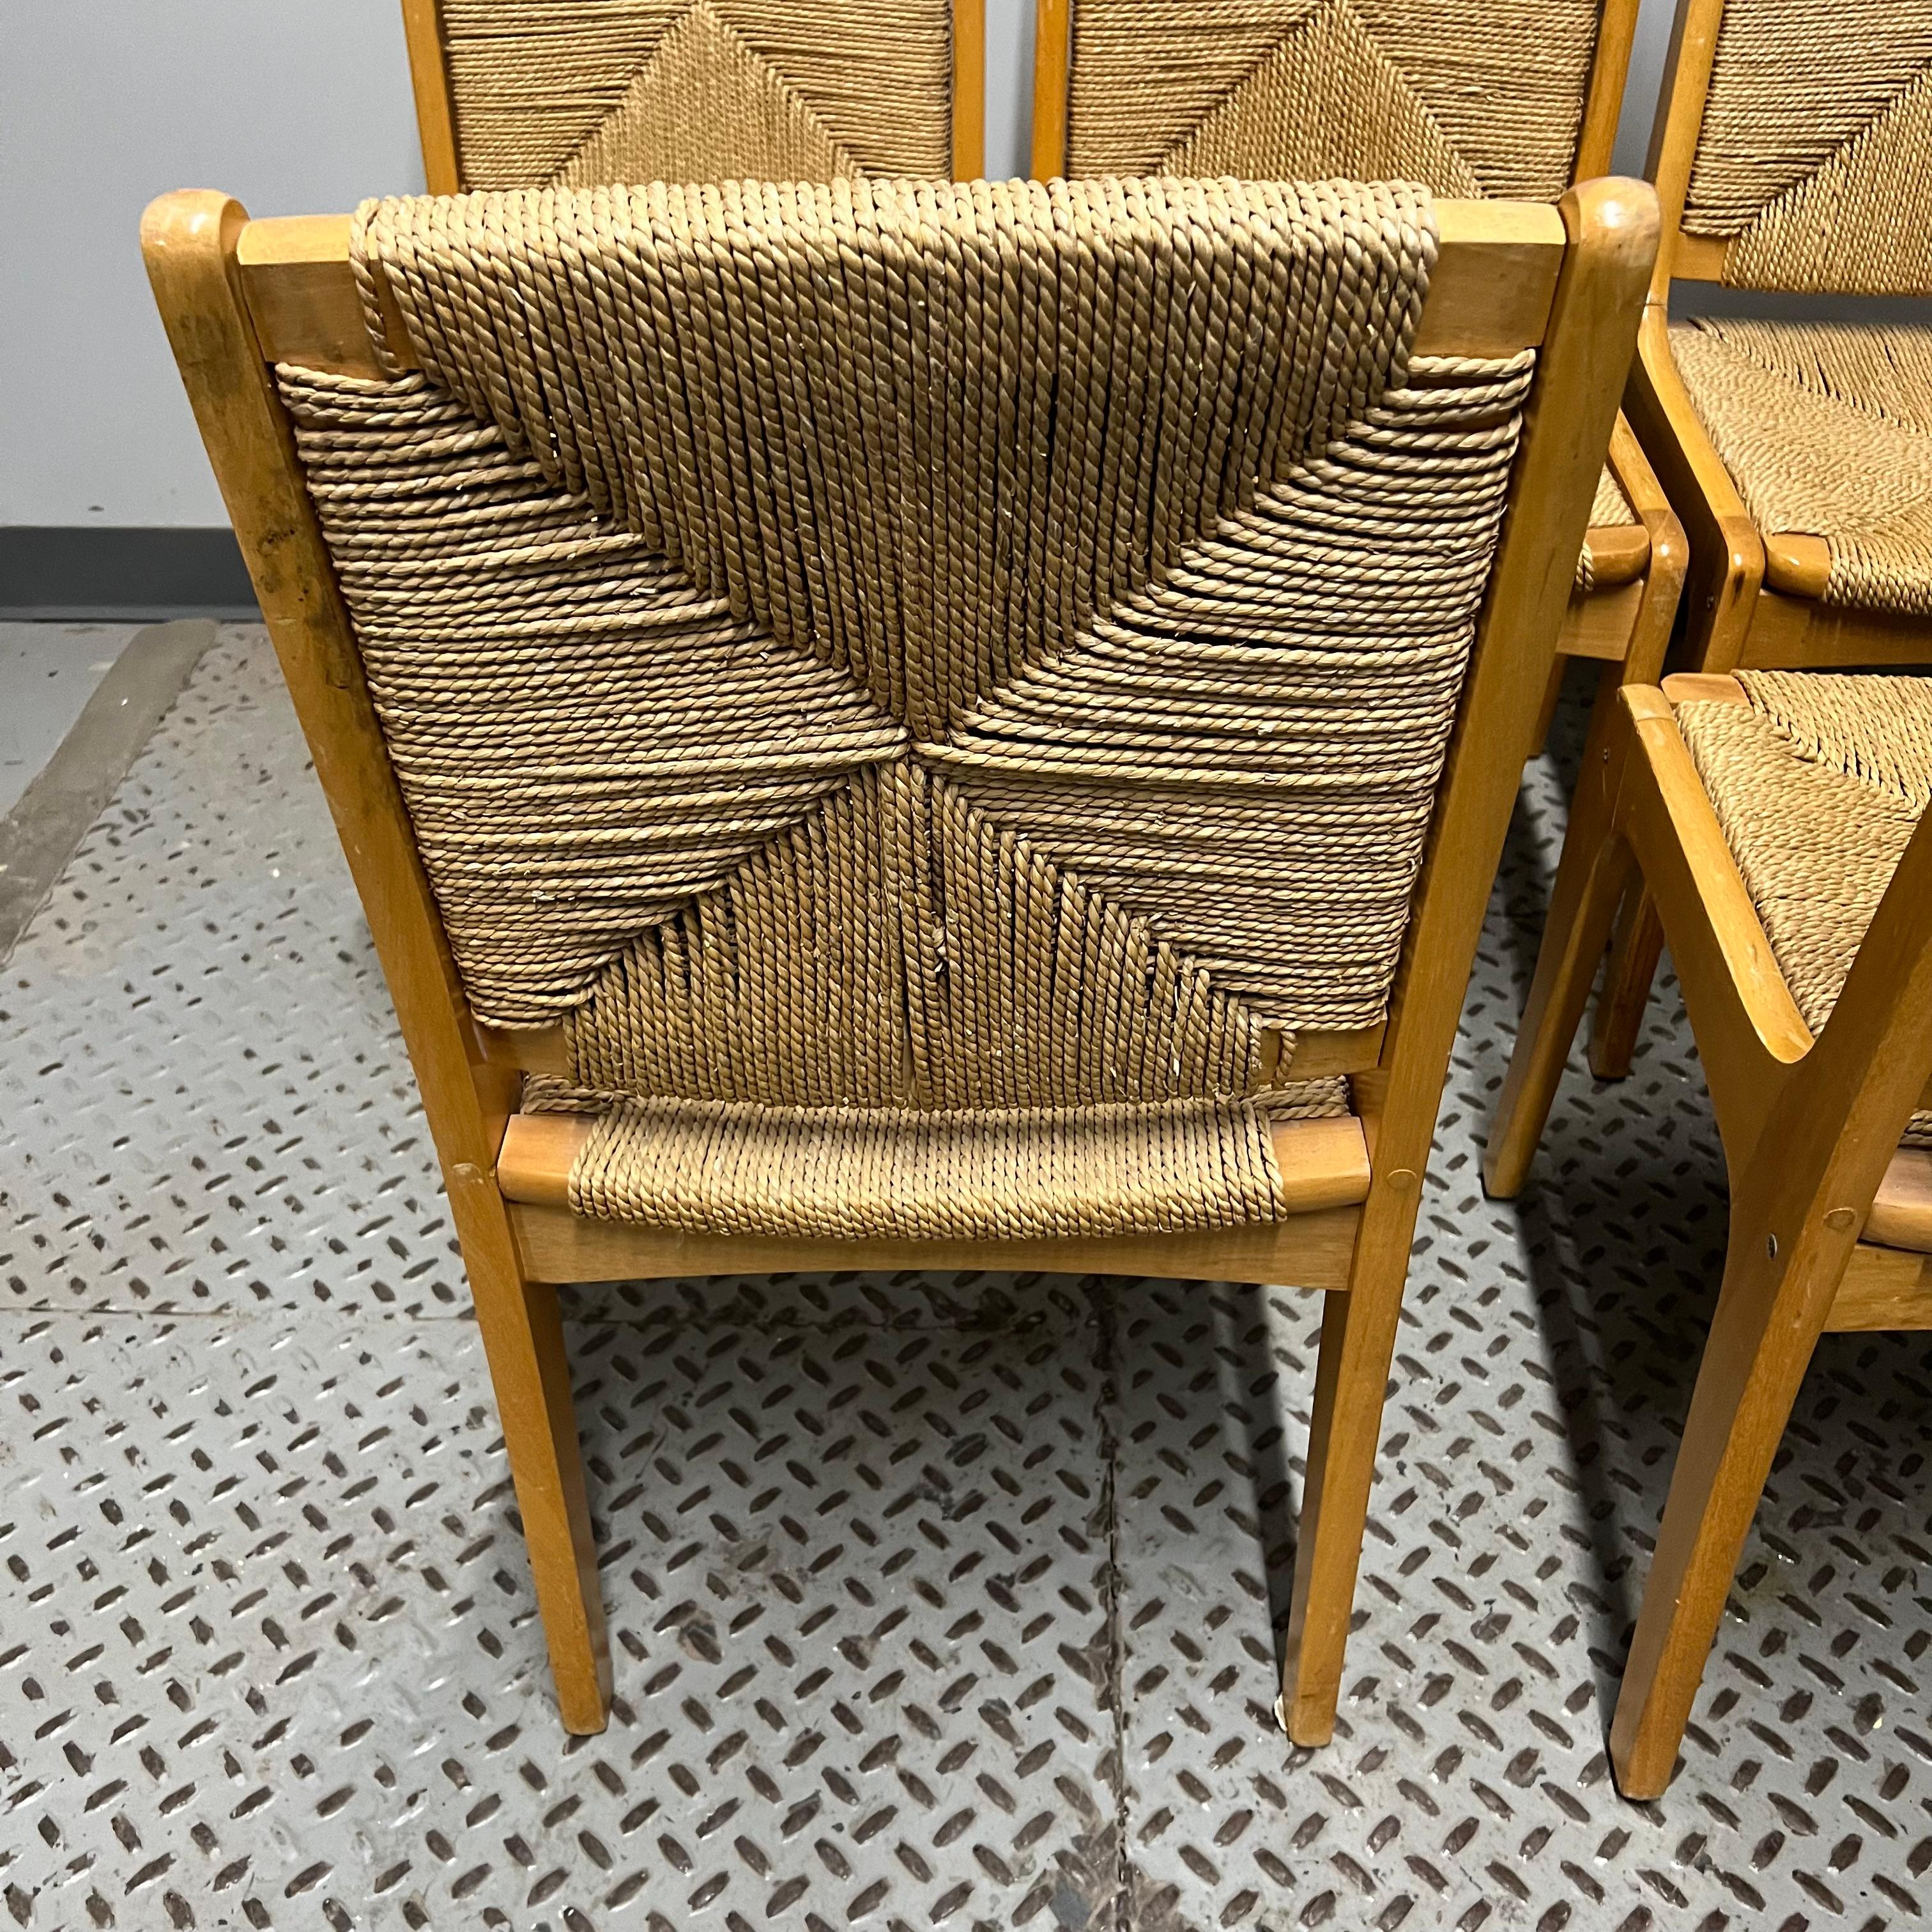 These dining chairs feature an oak frame with woven rush seats and backs.  They have a slight similarity to Charlotte Perriand or Vico Magistretti designed chairs.  They are unmarked.  They were purchased by the interior designer to a prominent